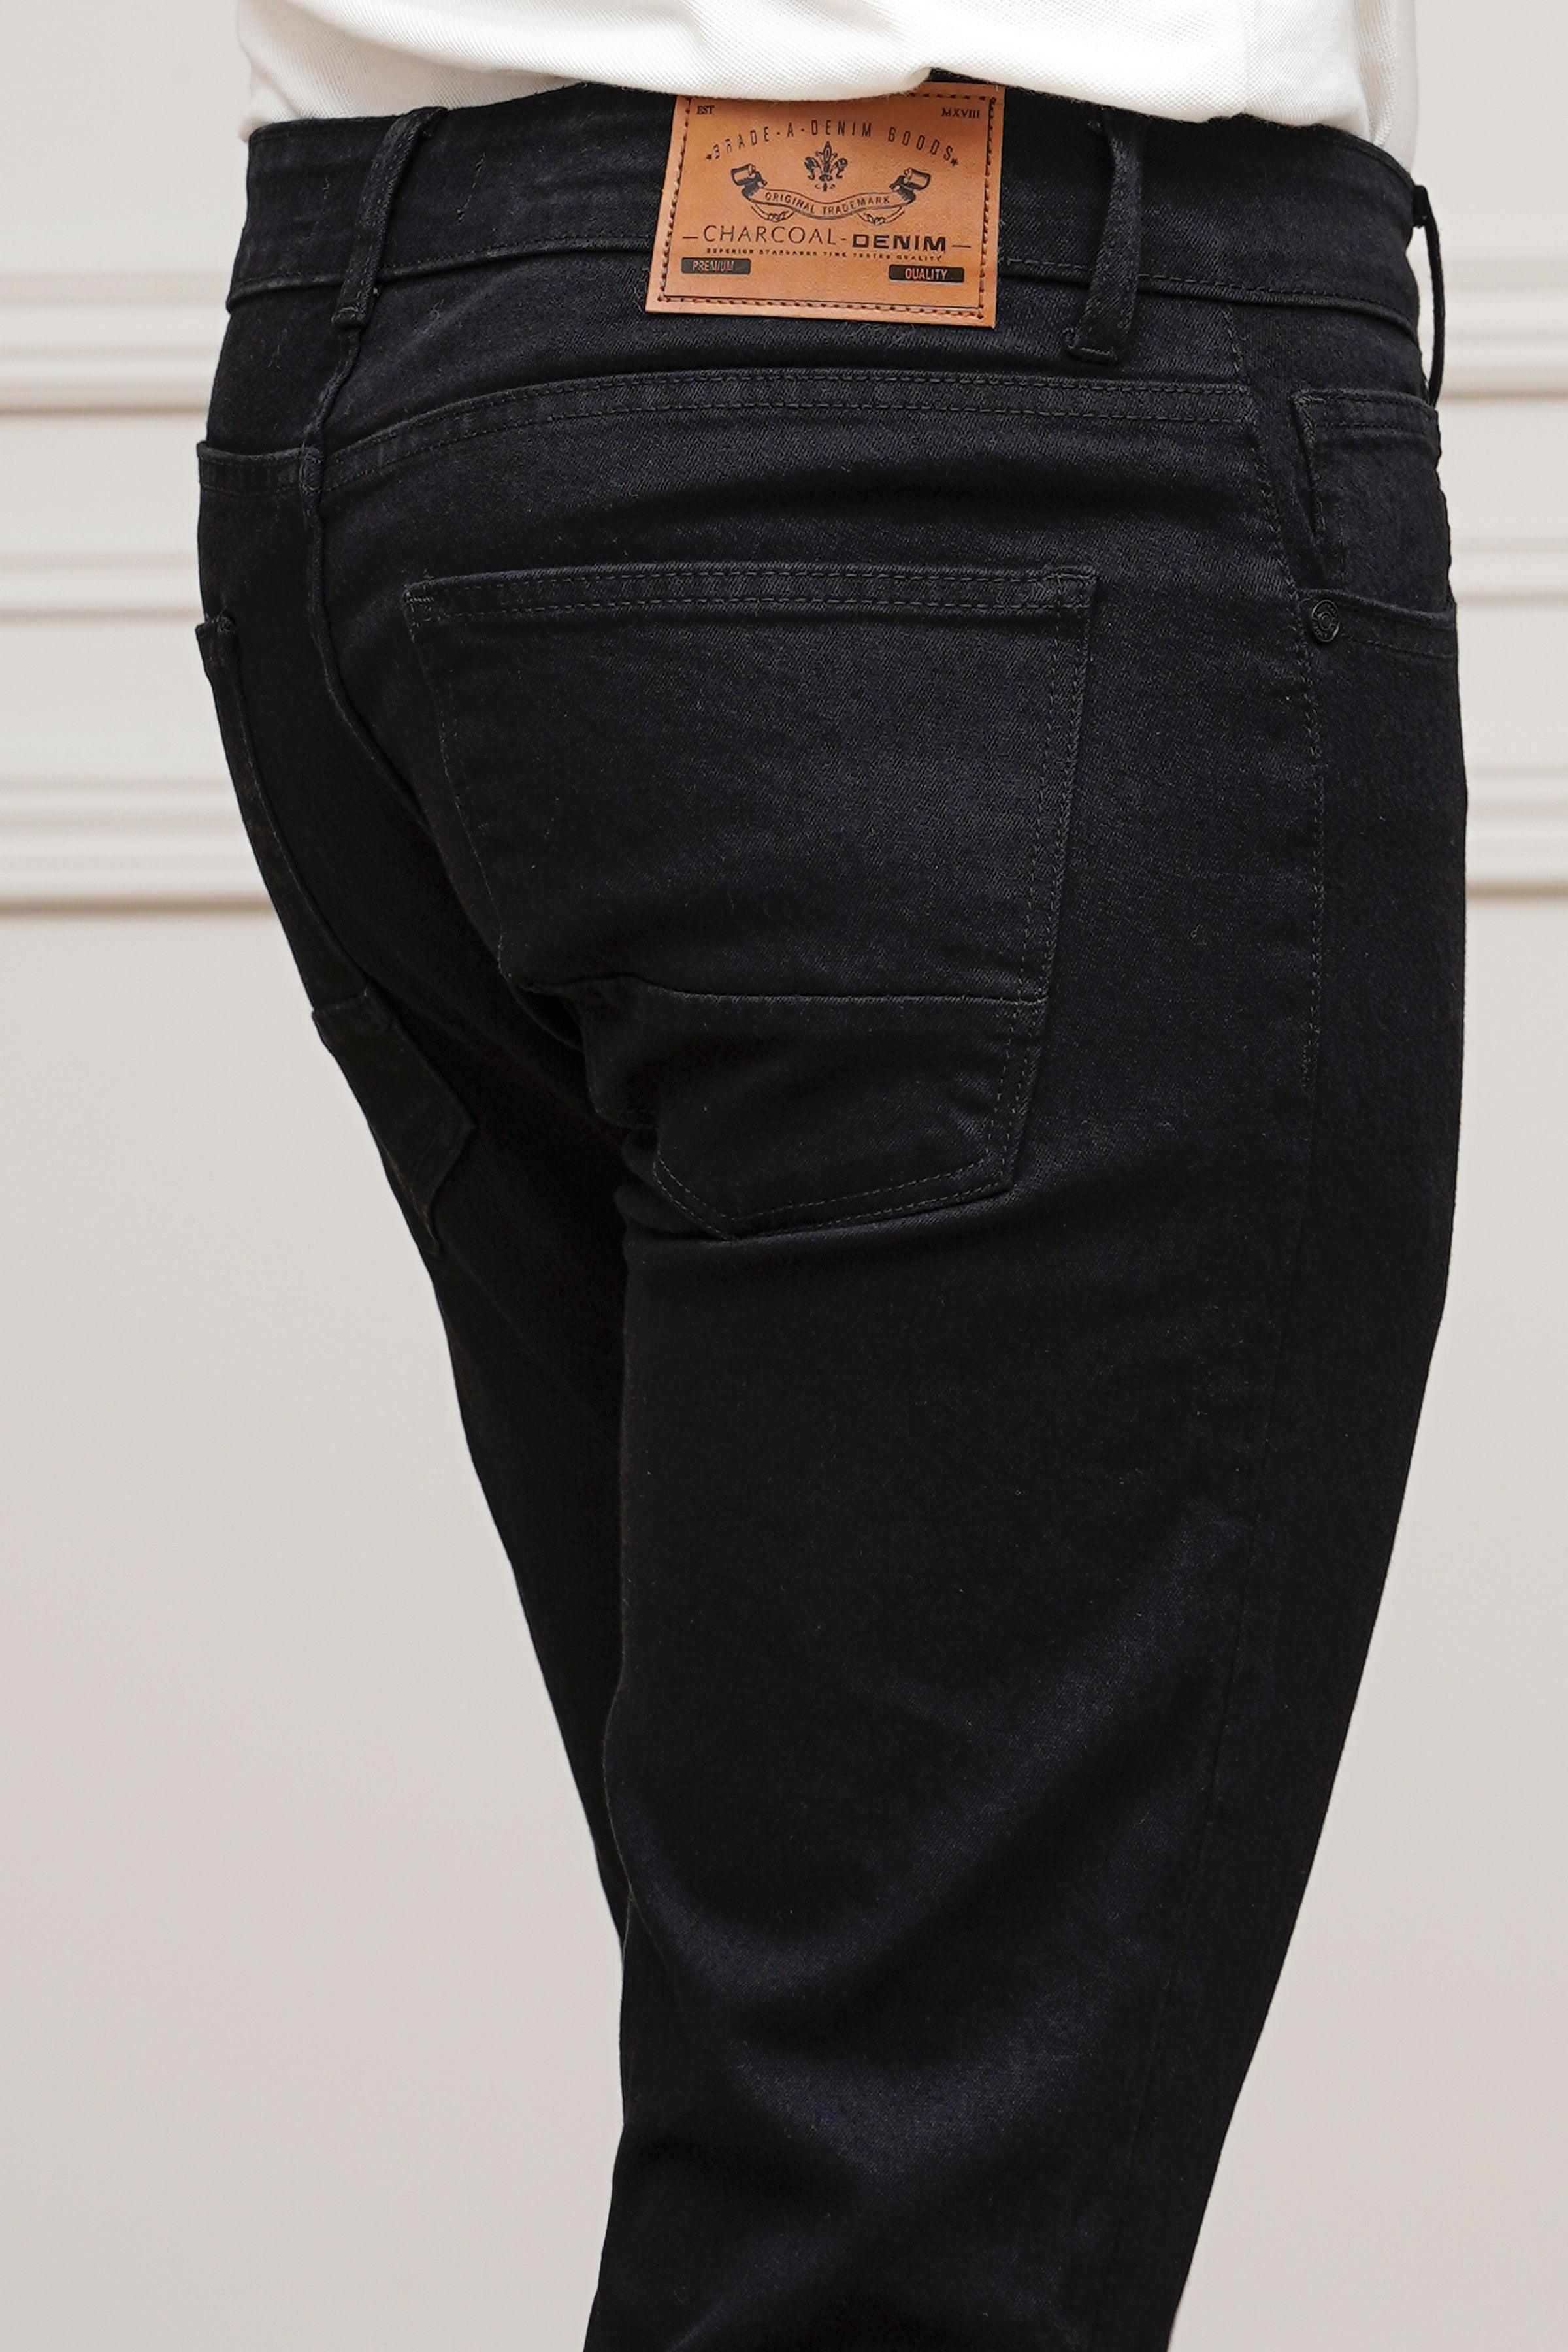 JEANS BLACK at Charcoal Clothing